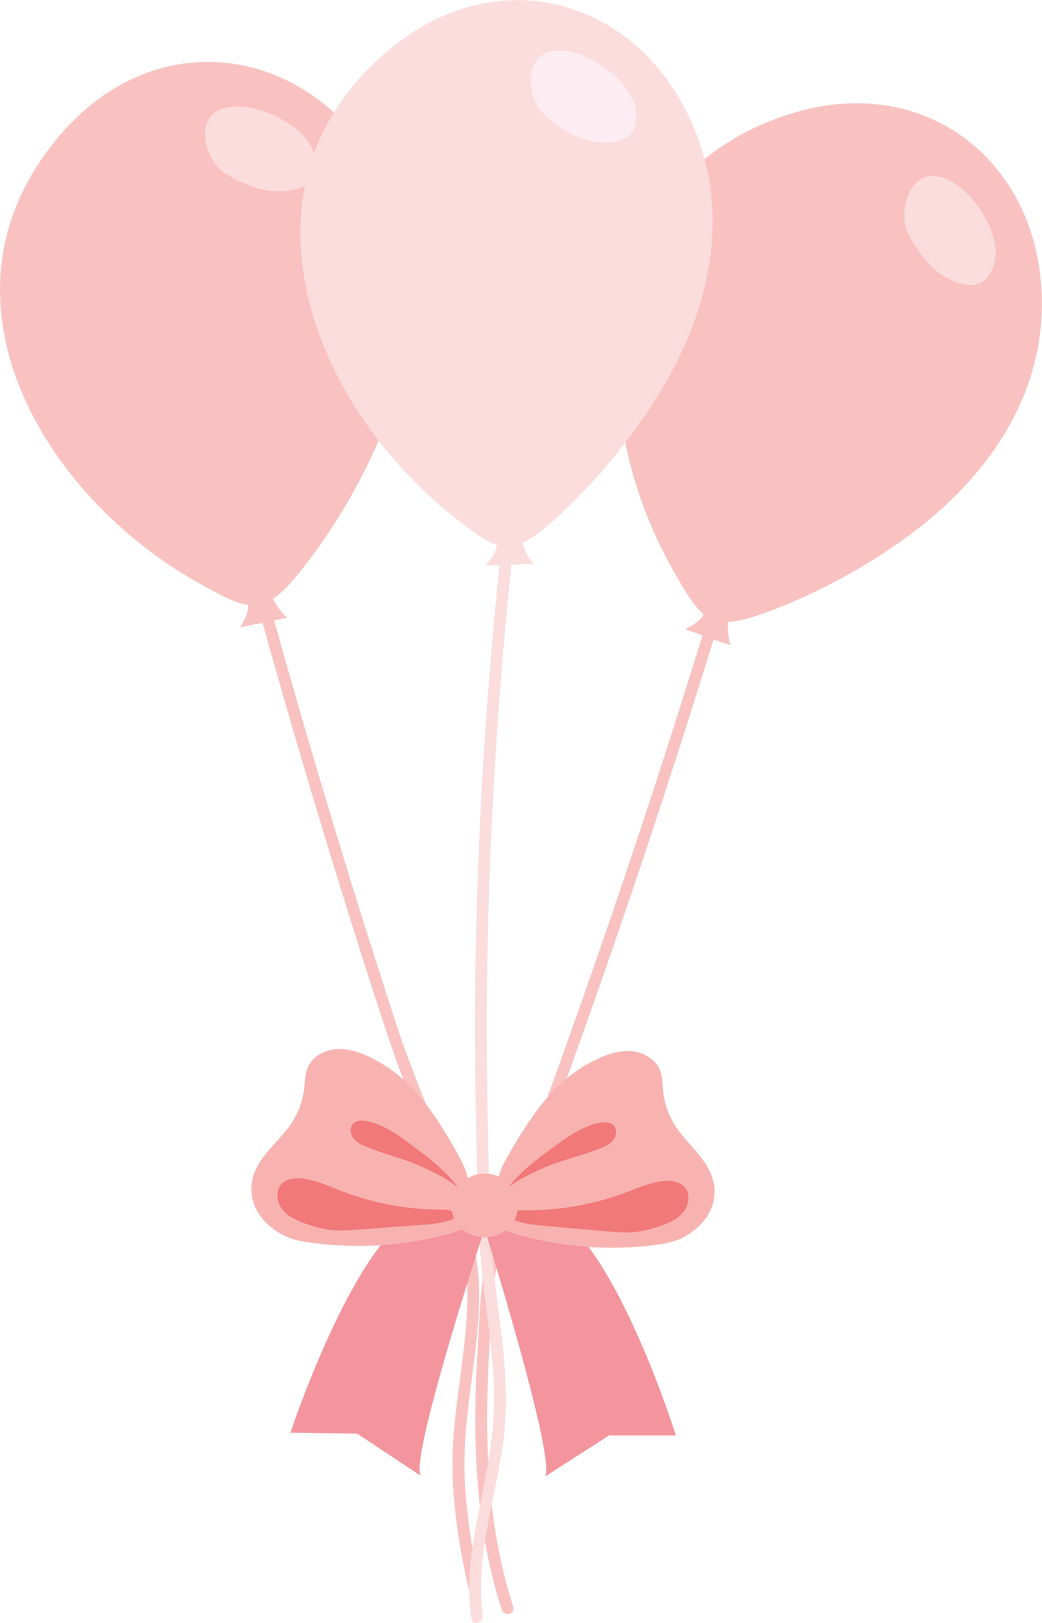 Balloons Tied with Ribbon Illustration